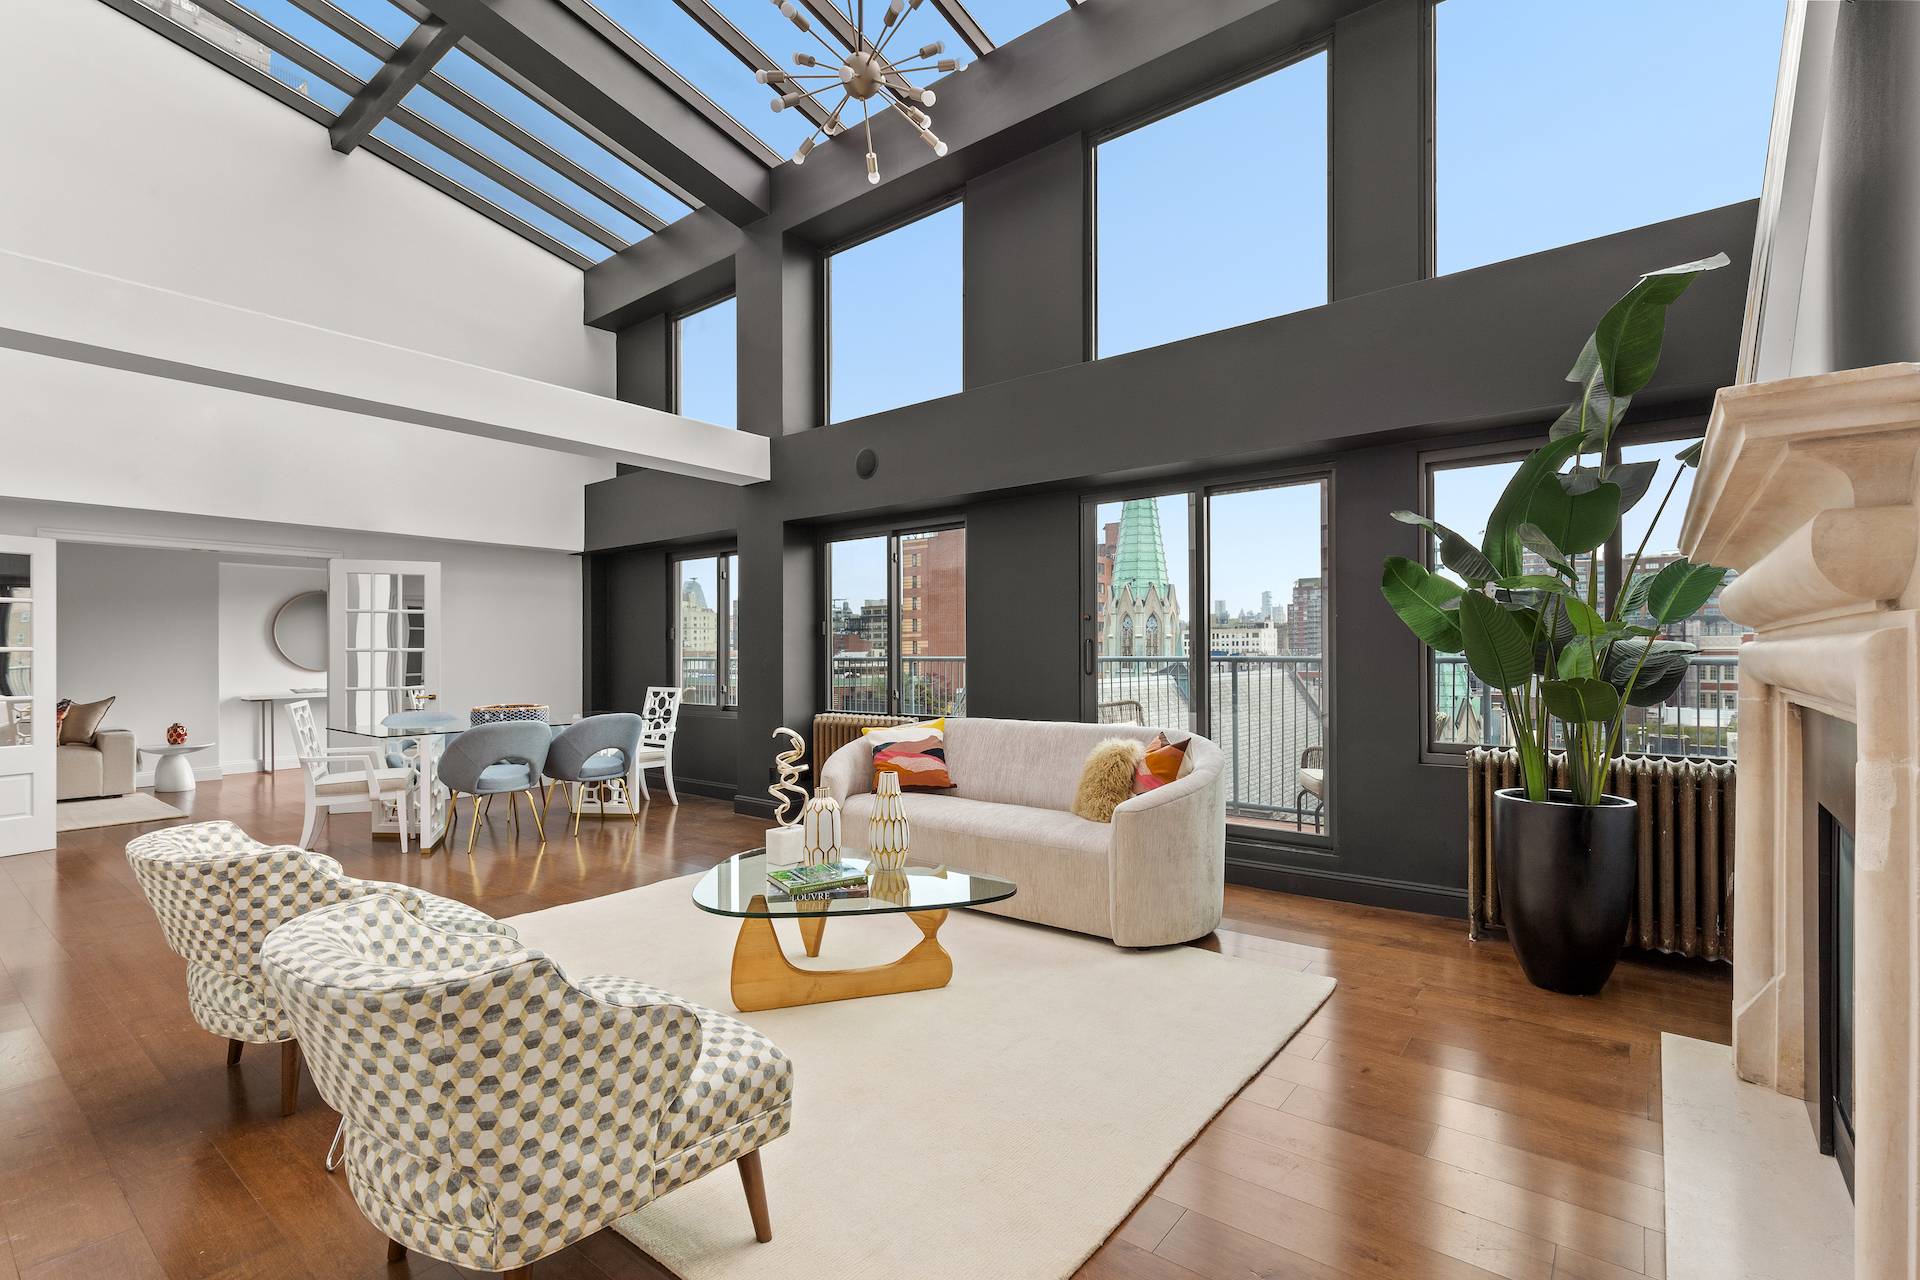 Duplex Penthouse Perfection in West Chelsea